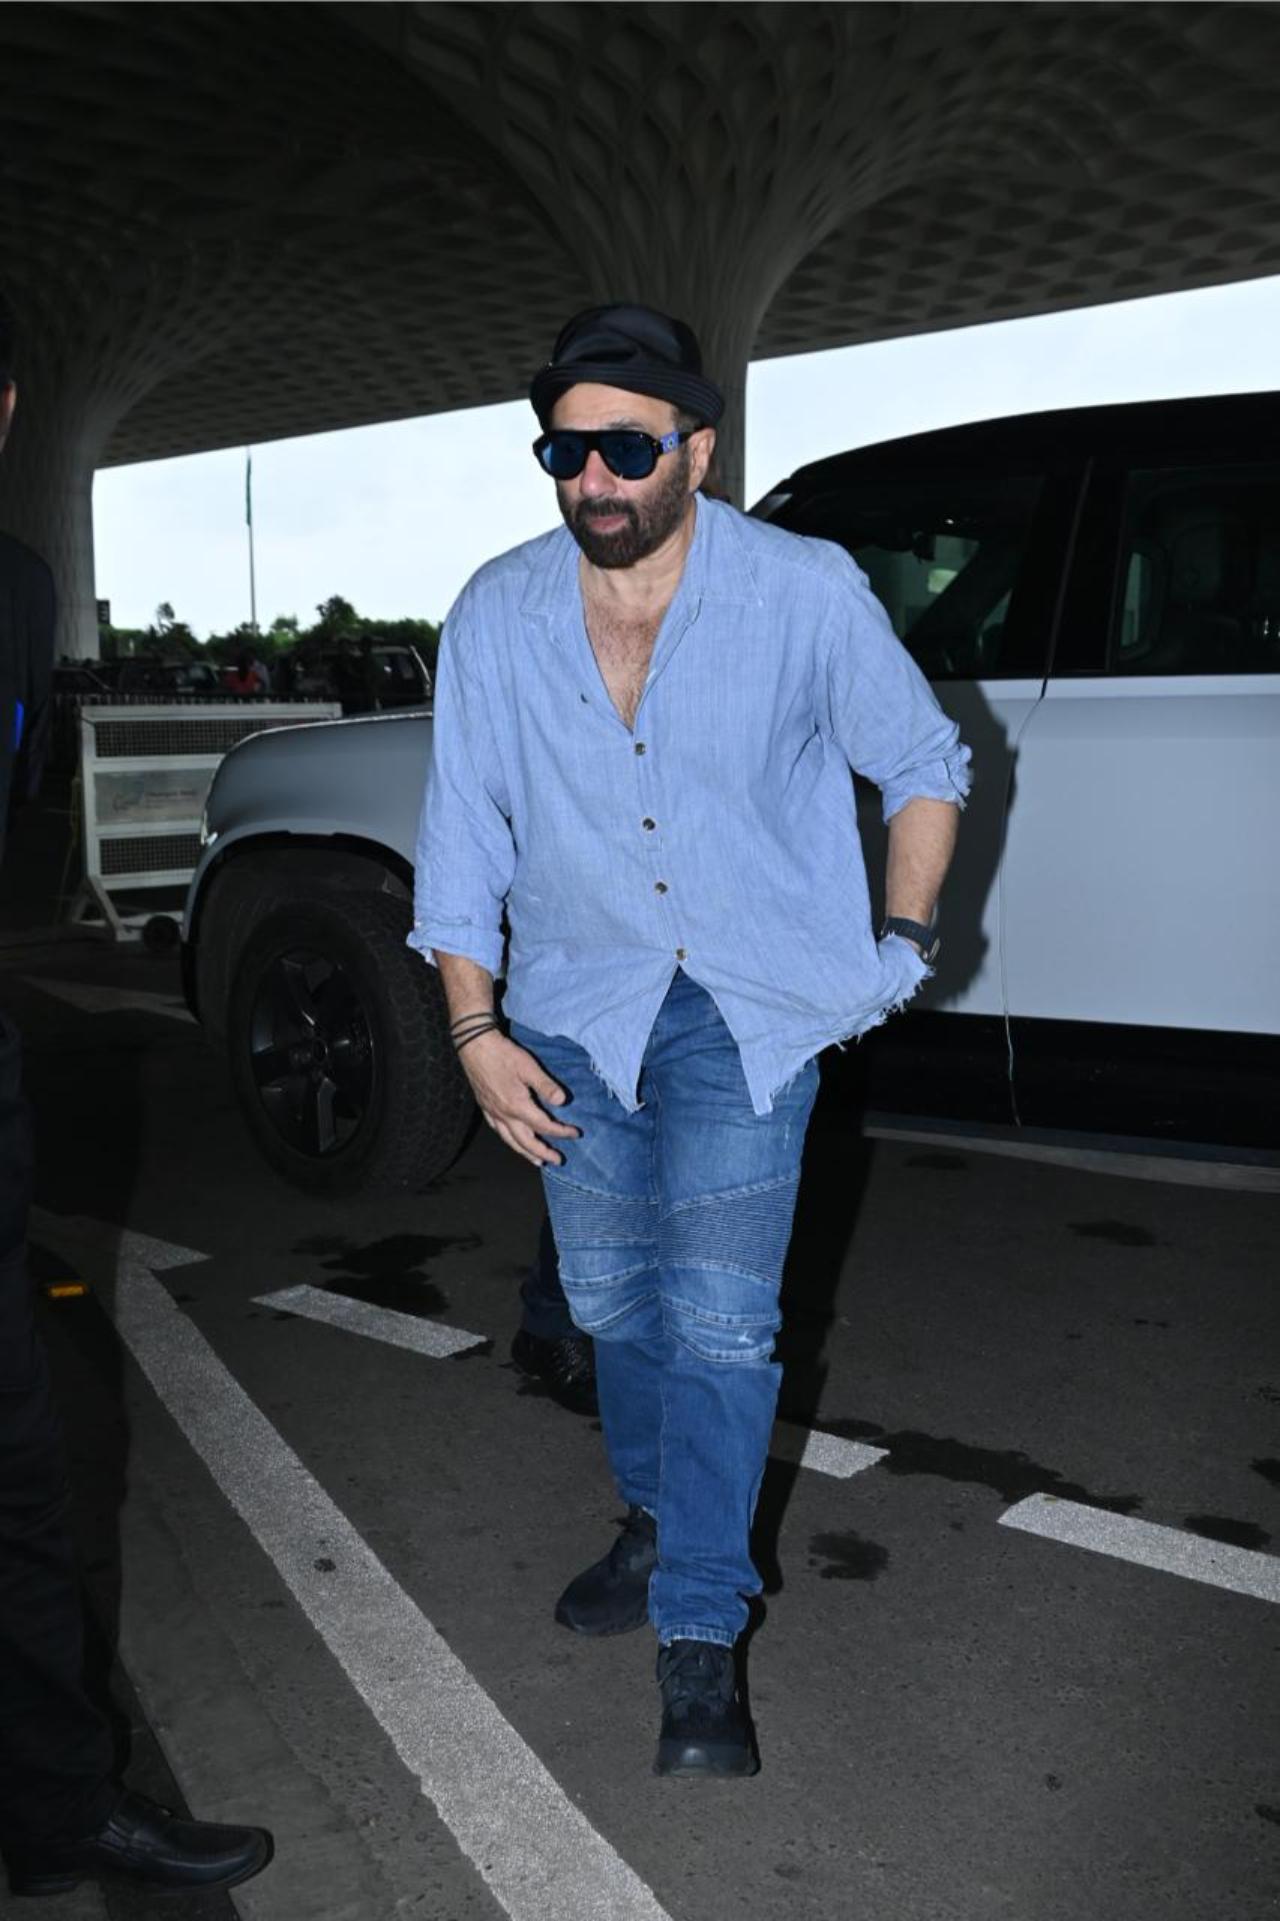 Sunny Deol was also captured getting out of his car at the Mumbai airport today. He wore a casual, laid-back fit comprising blue shirt, denim jeans and a hat